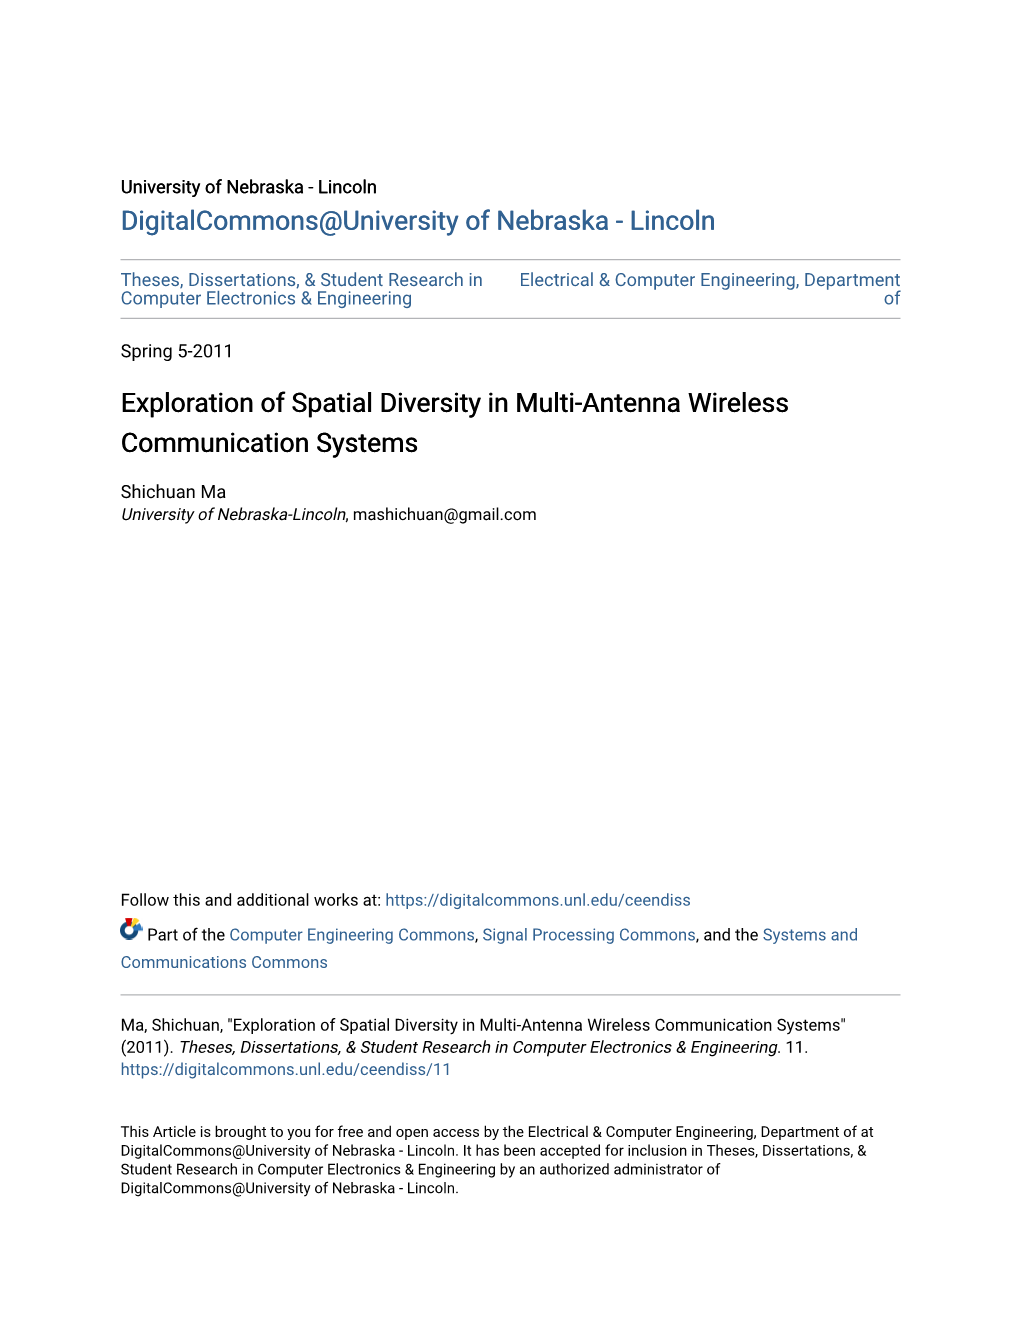 Exploration of Spatial Diversity in Multi-Antenna Wireless Communication Systems